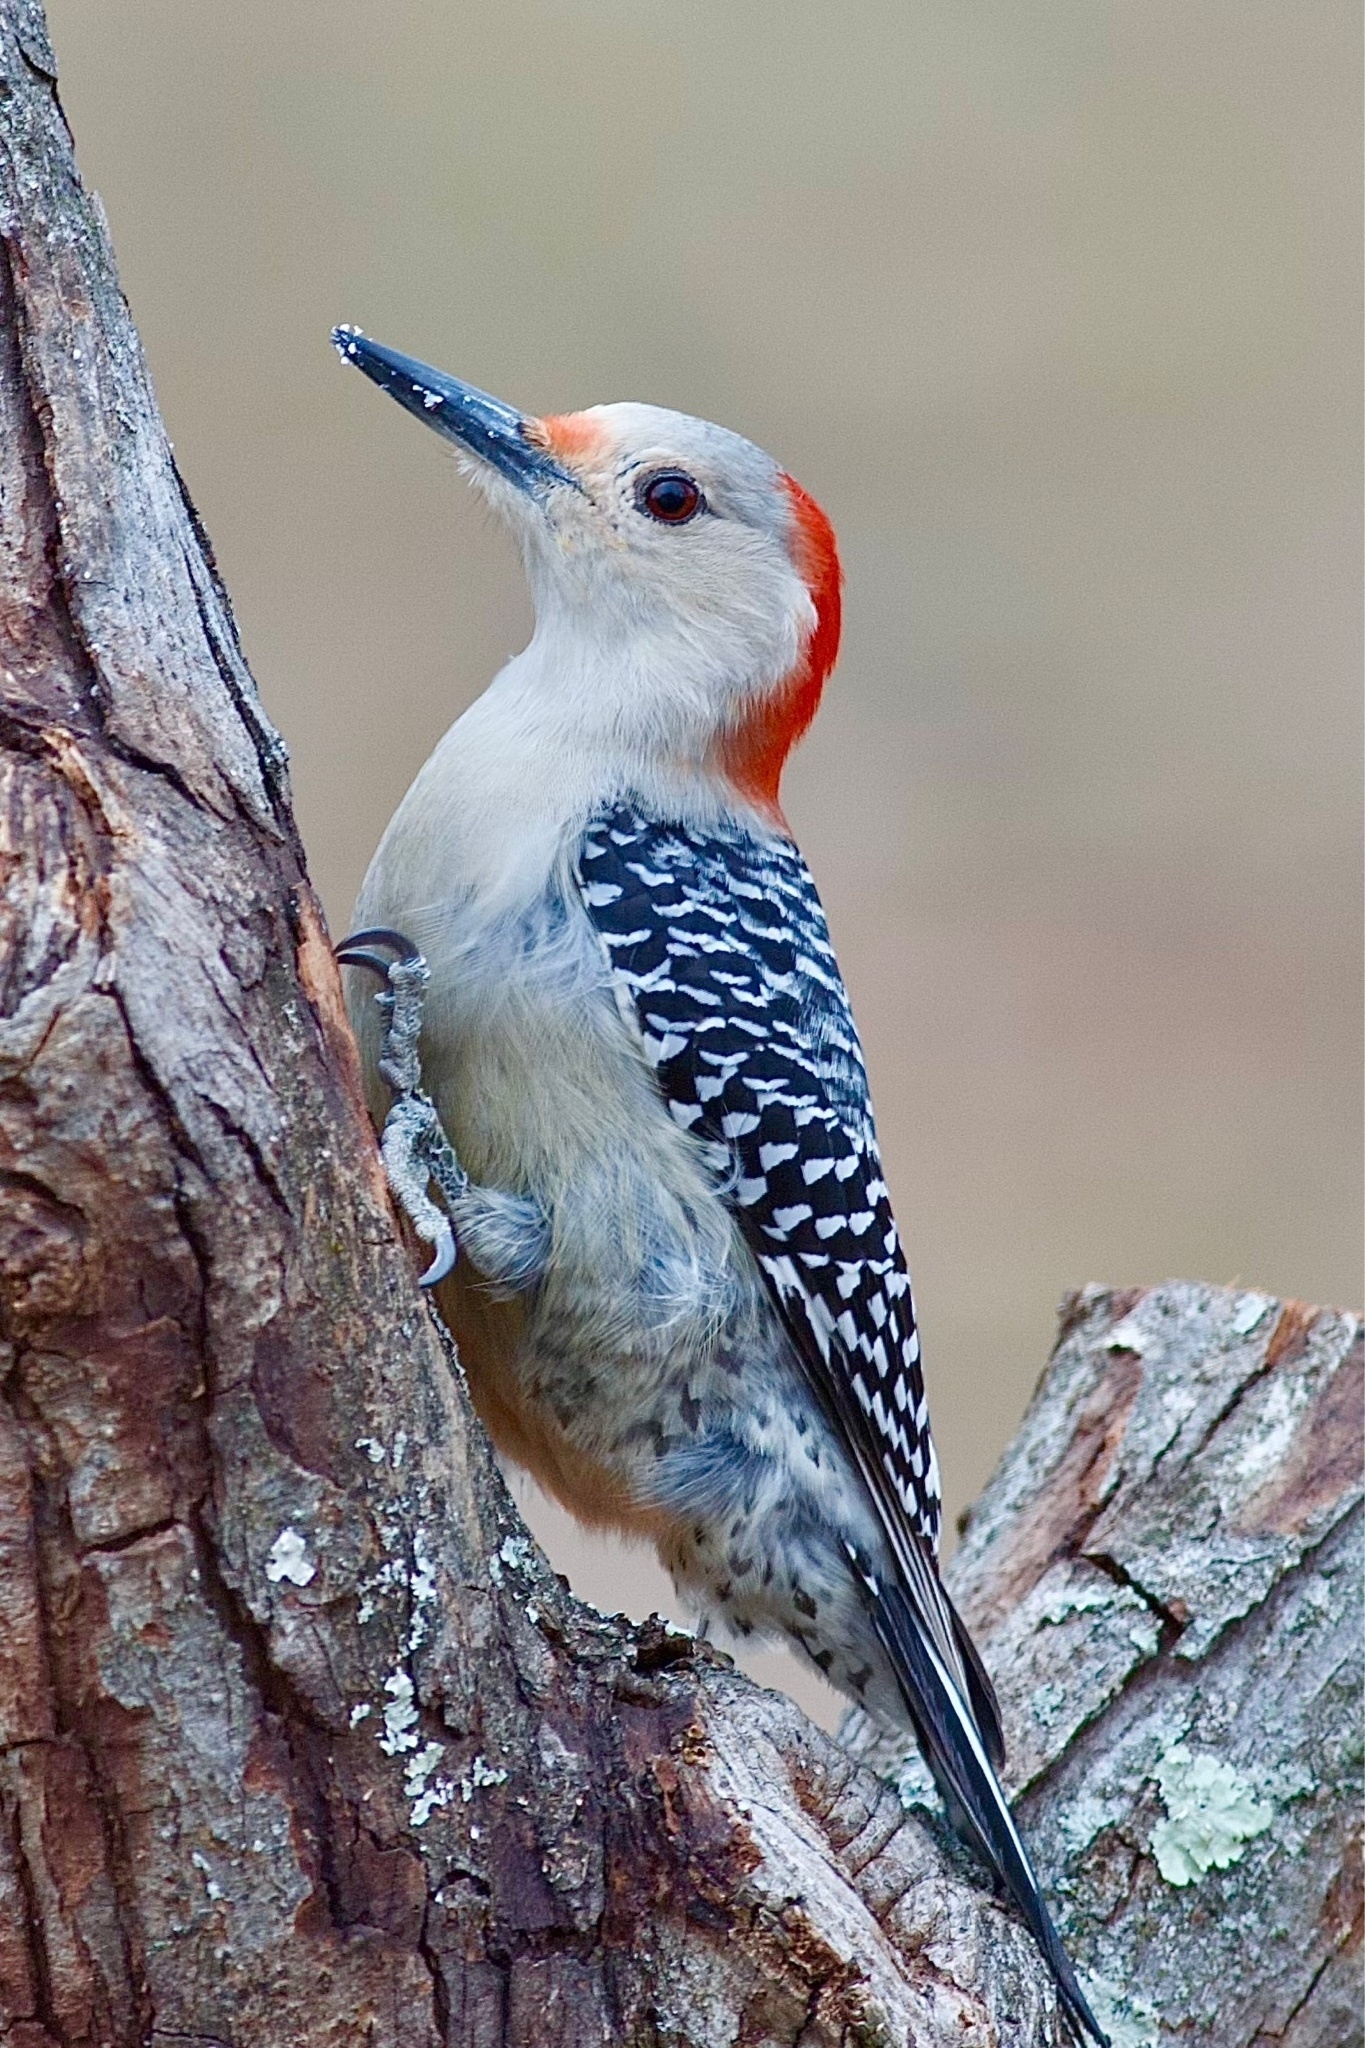 A woodpecker is perched on a tree set against a blurred background. The underside of the bird is predominantly off-white, and the back-top of her head is red, and her back feathers are black and white striped.